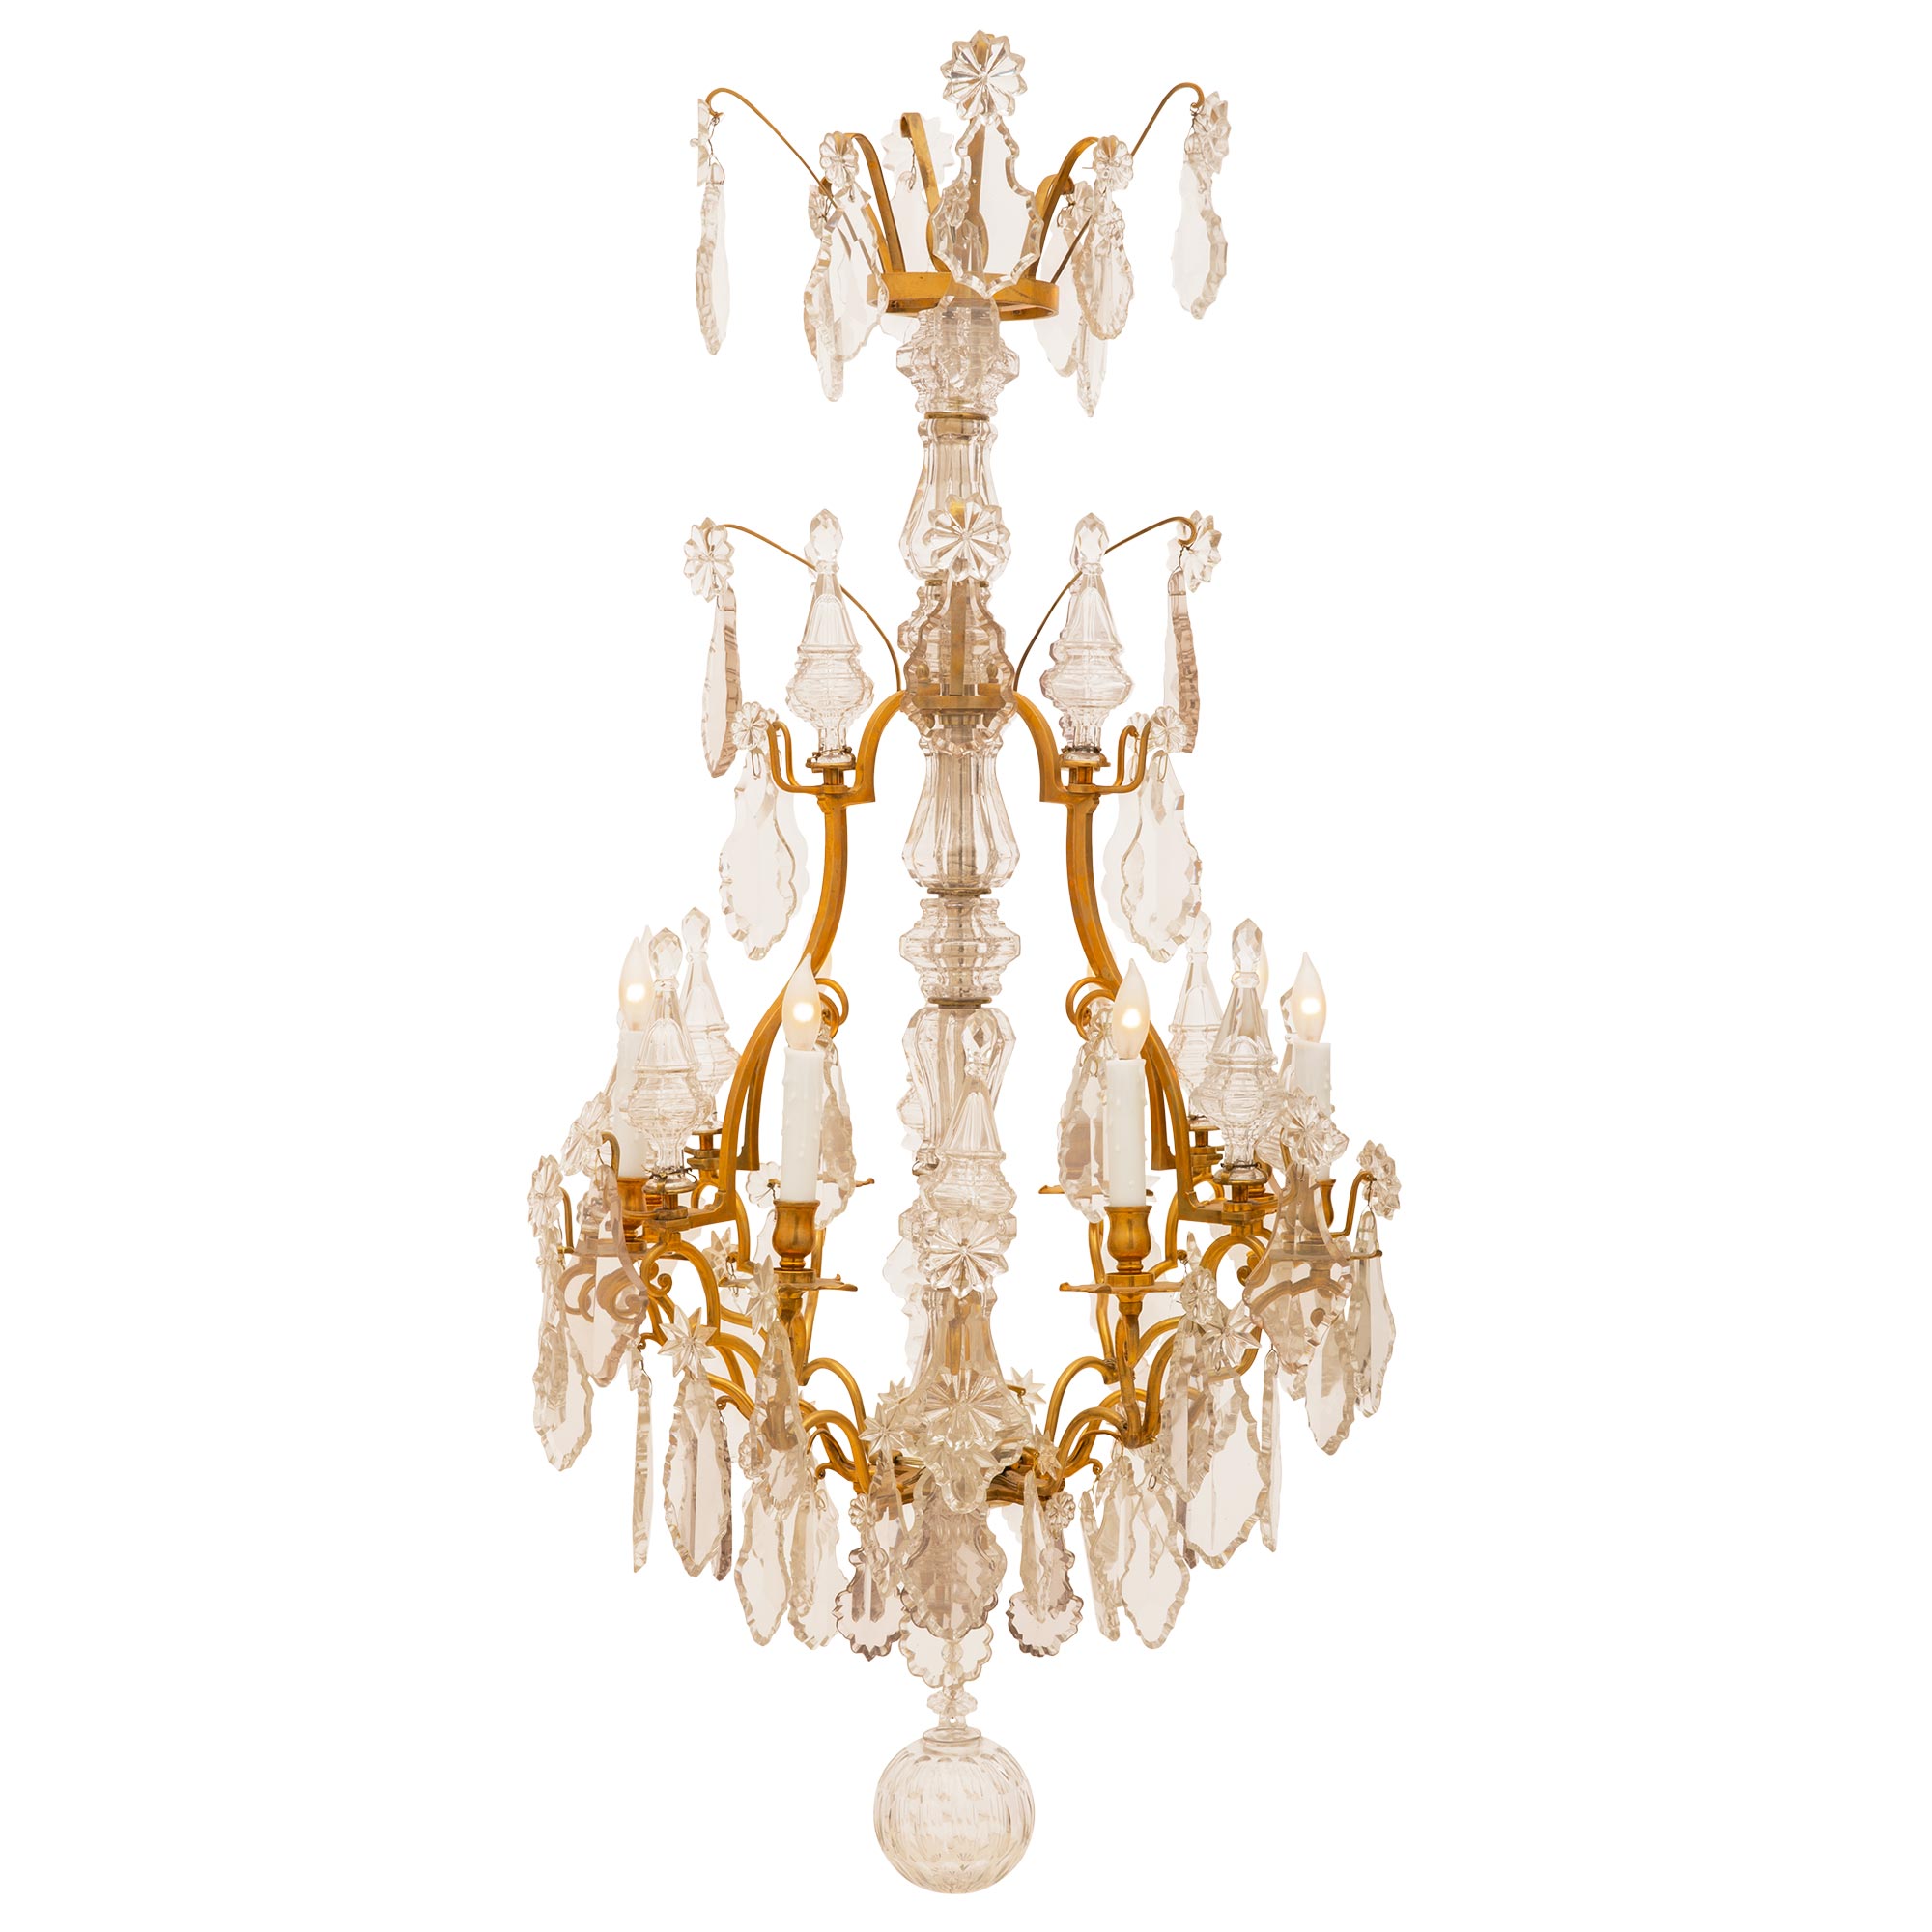 French 19th Century Louis XV Style Crystal and Ormolu Eight-Light Chandelier